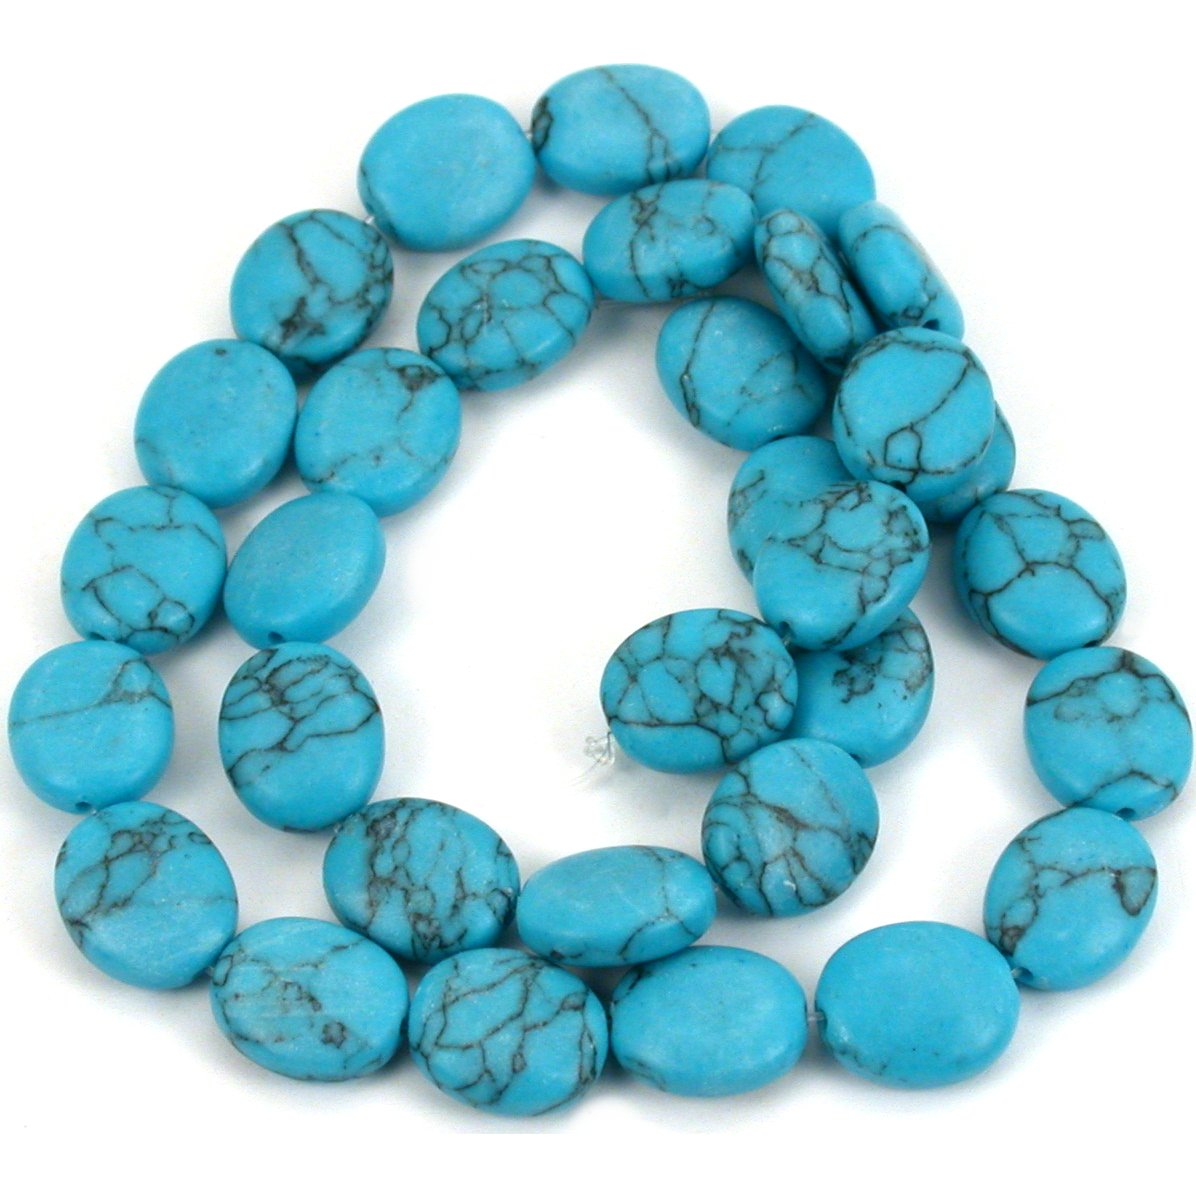 Turquoise Matrix Synthetic Flat Oval Beads 12mm 1 Strand